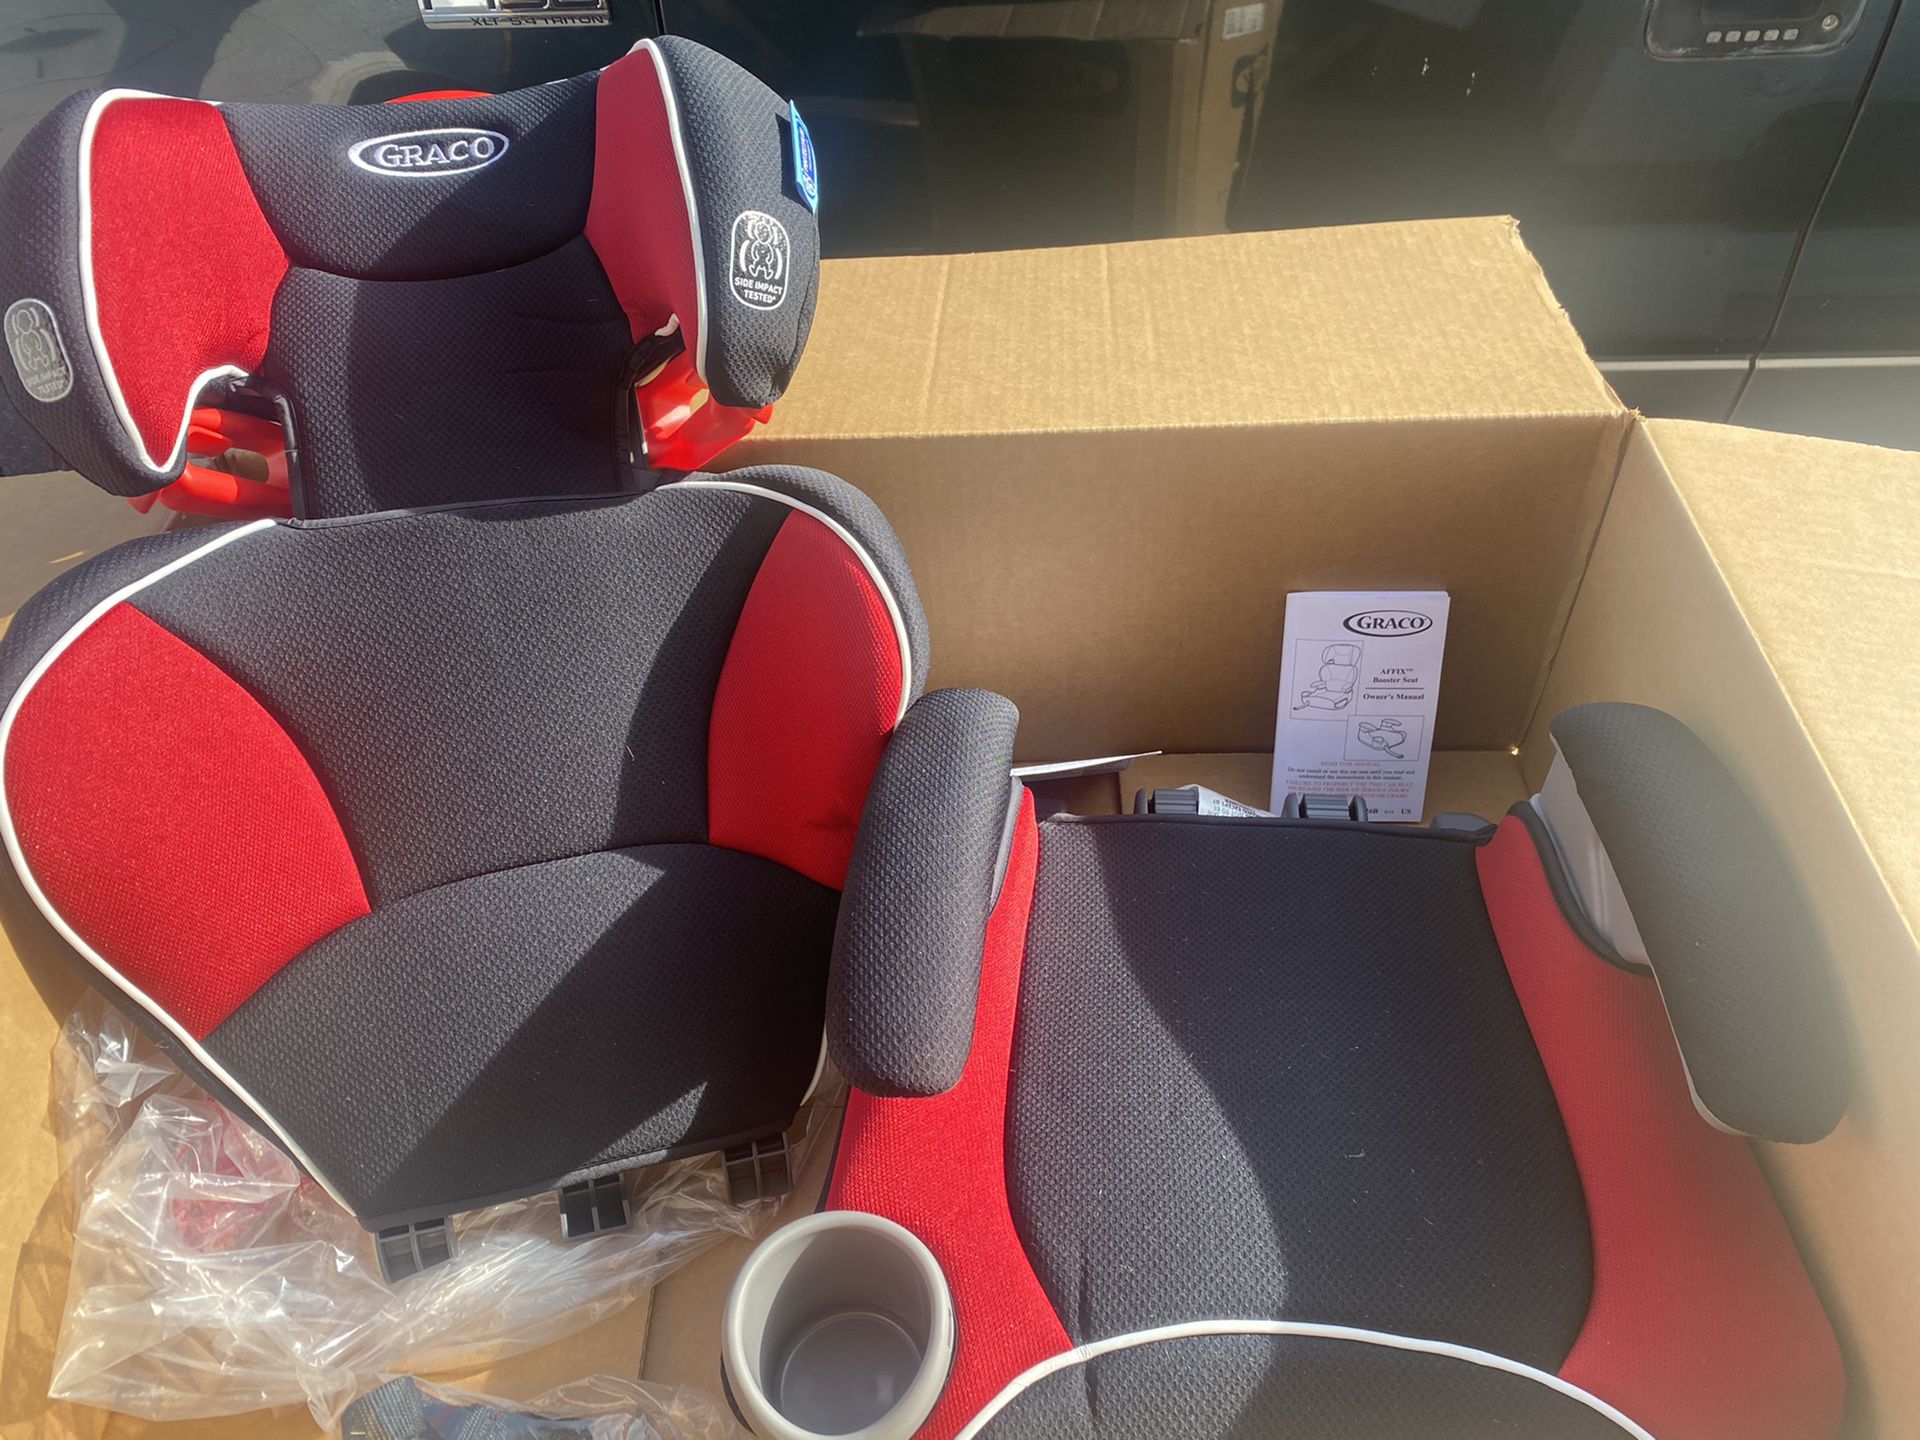 Graco Affix Highback Booster Seat with Latch System